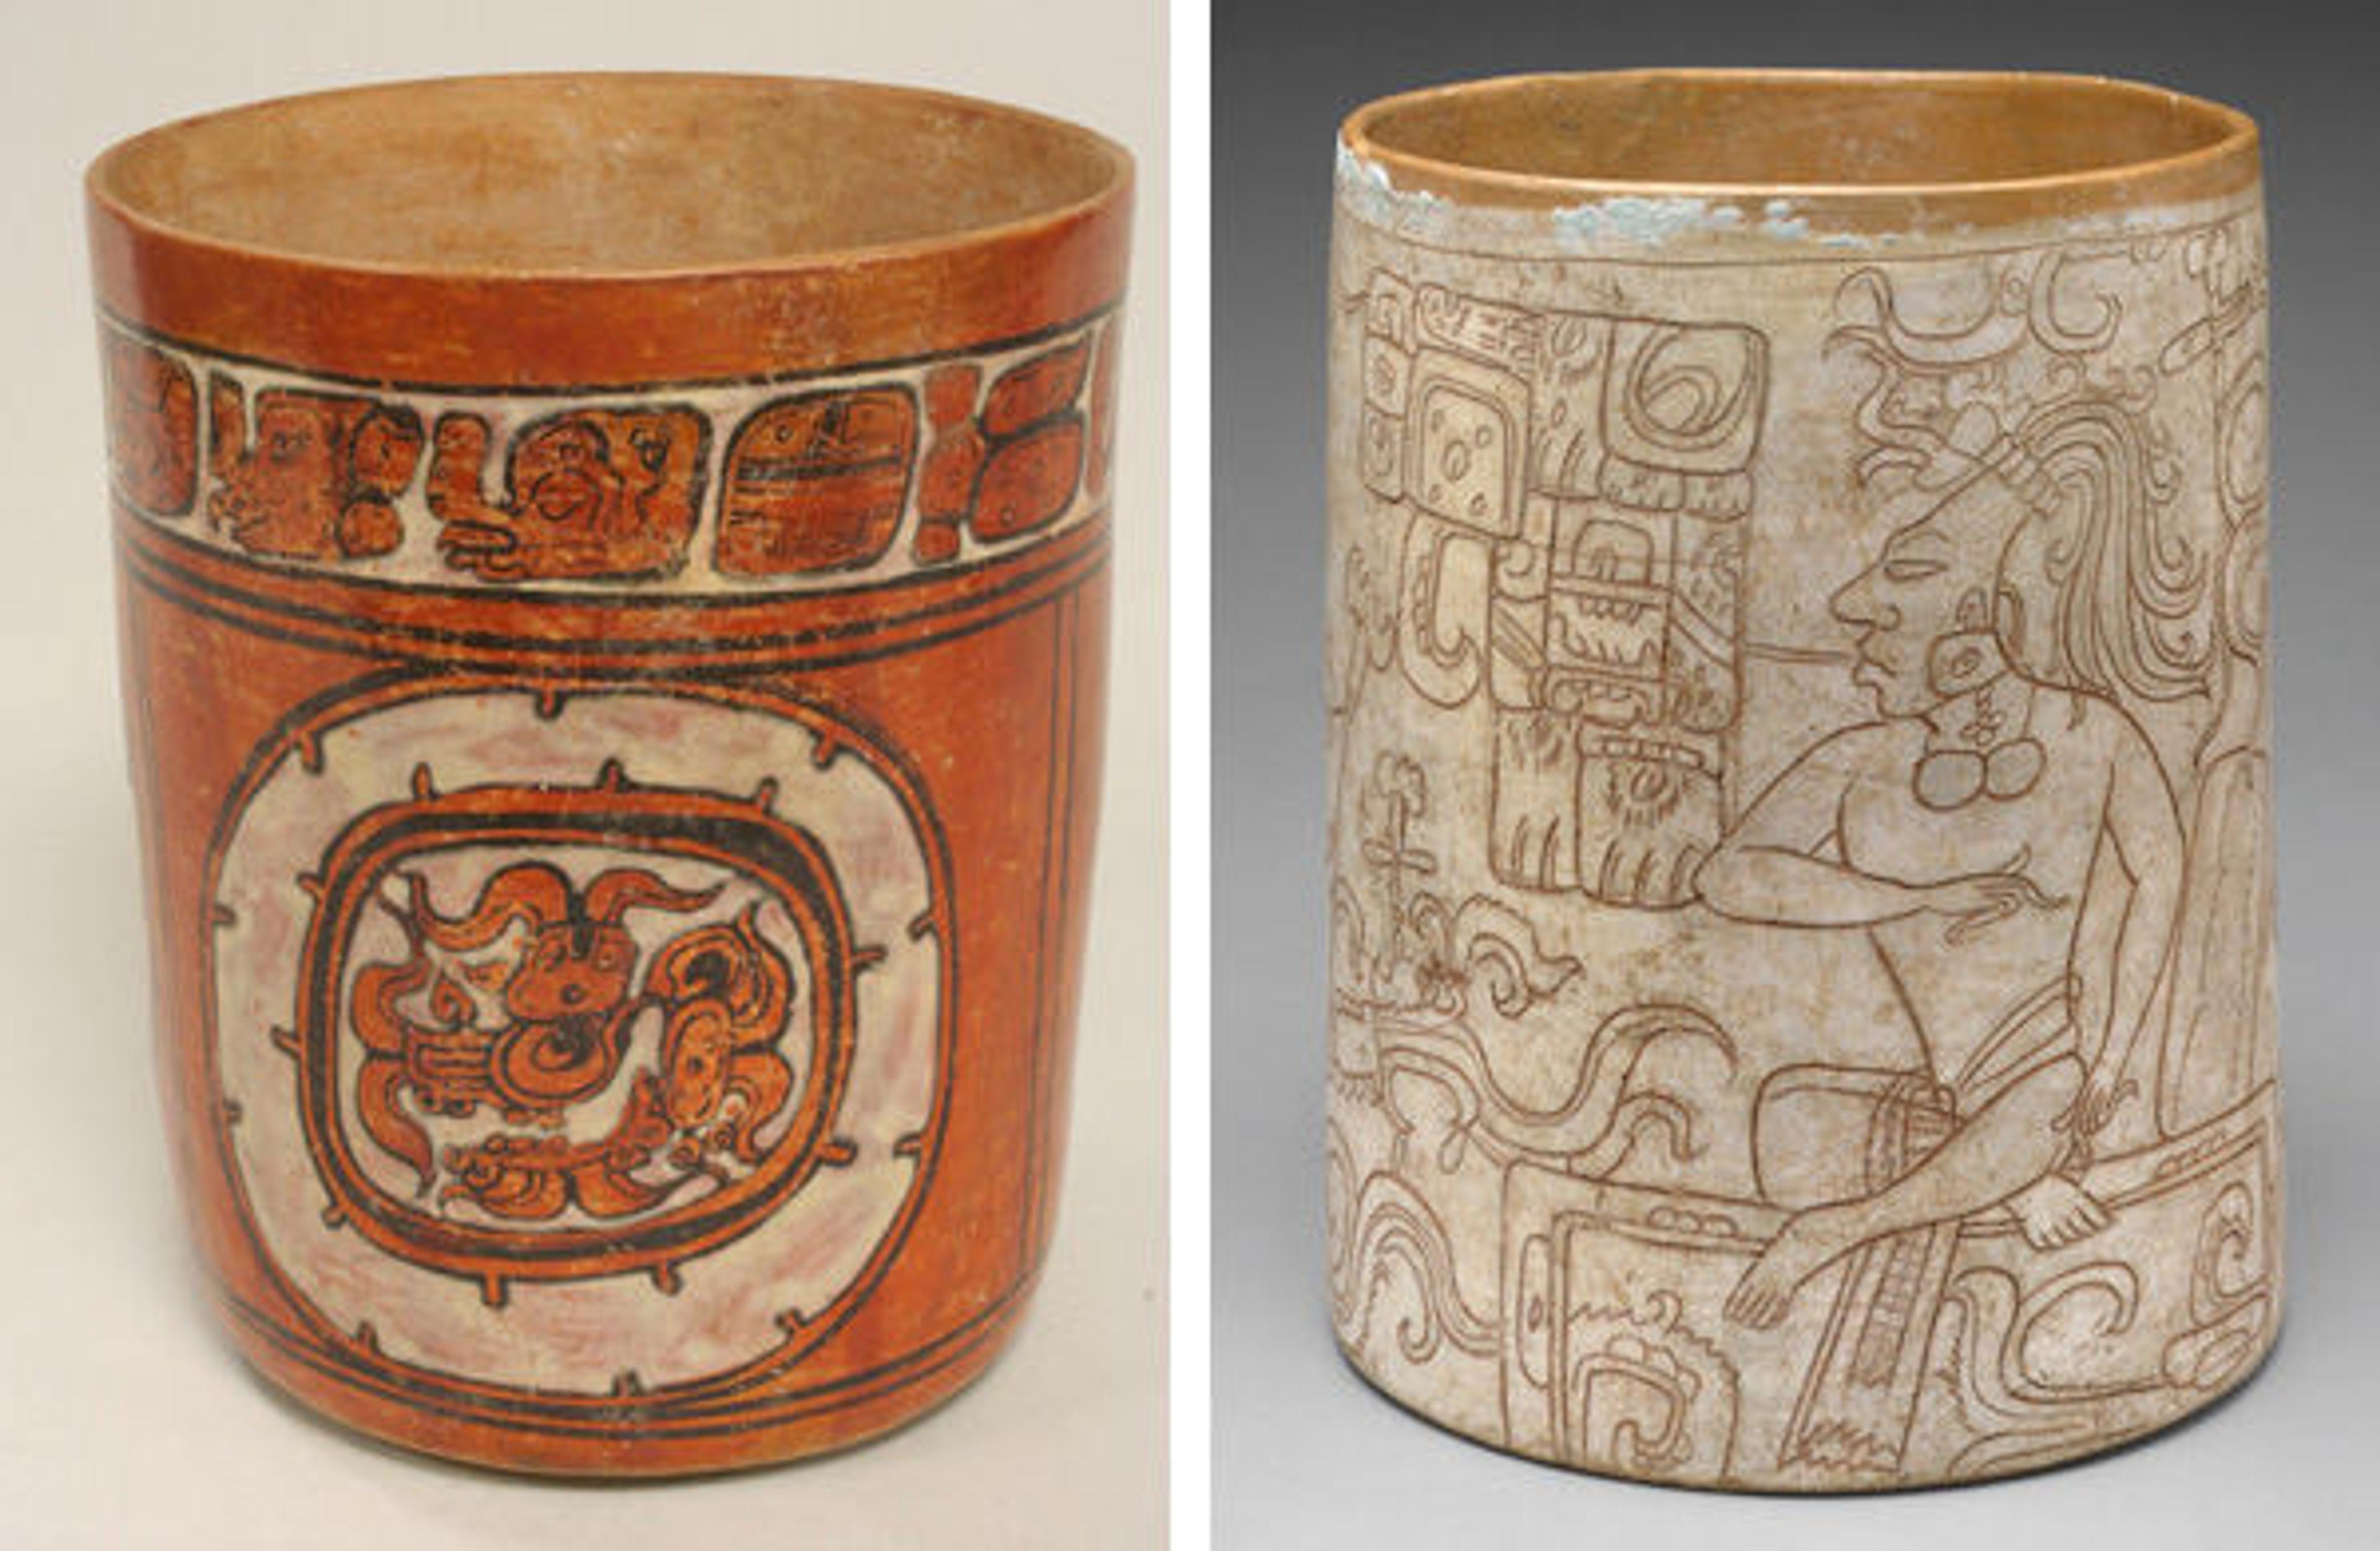 Left: Cylindrical vessel, 6th–9th century | The Metropolitan Museum of Art, Anonymous Gift, 2005 | 2005.435. Right: Vessel with seated lord, 7th–8th century | The Metropolitan Museum of Art, Purchase, Joseph Pulitzer Bequest, 1992 | 1992.4